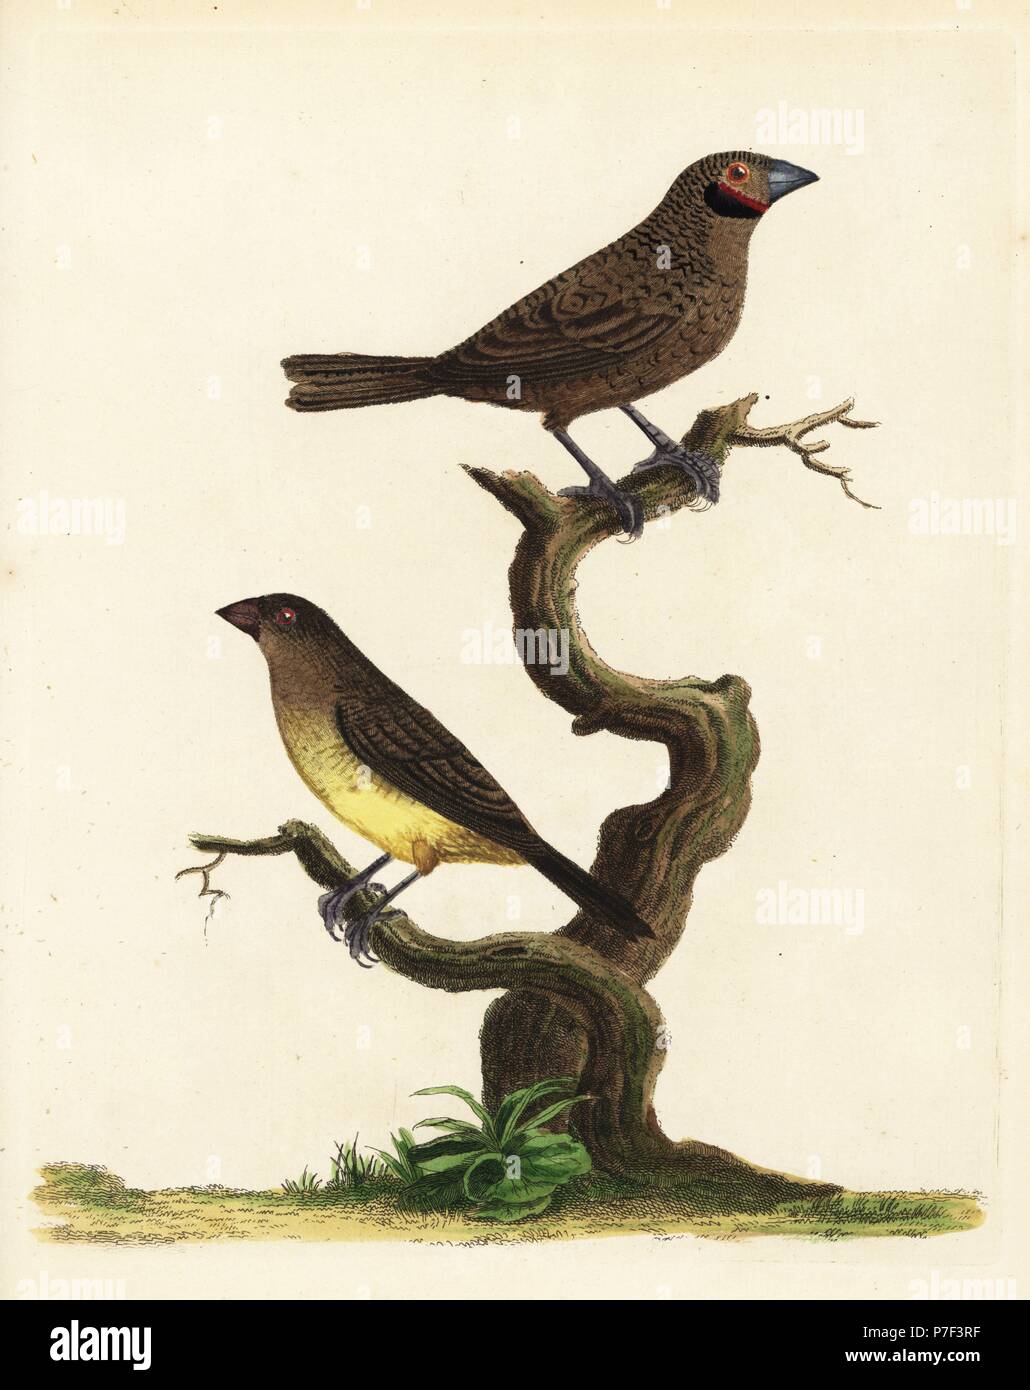 Cut-throat finch, Amadina fasciata, and African silverbill, Euodice cantans. (Fasciated grosbeak, Loxia fasciata and brown grosbeak, Loxia cantans.) In the possession of Marmaduke Tunstall. Handcoloured copperplate engraving by Peter Brown from his New Illustrations of Zoology, B. White, London, 1776. Stock Photo